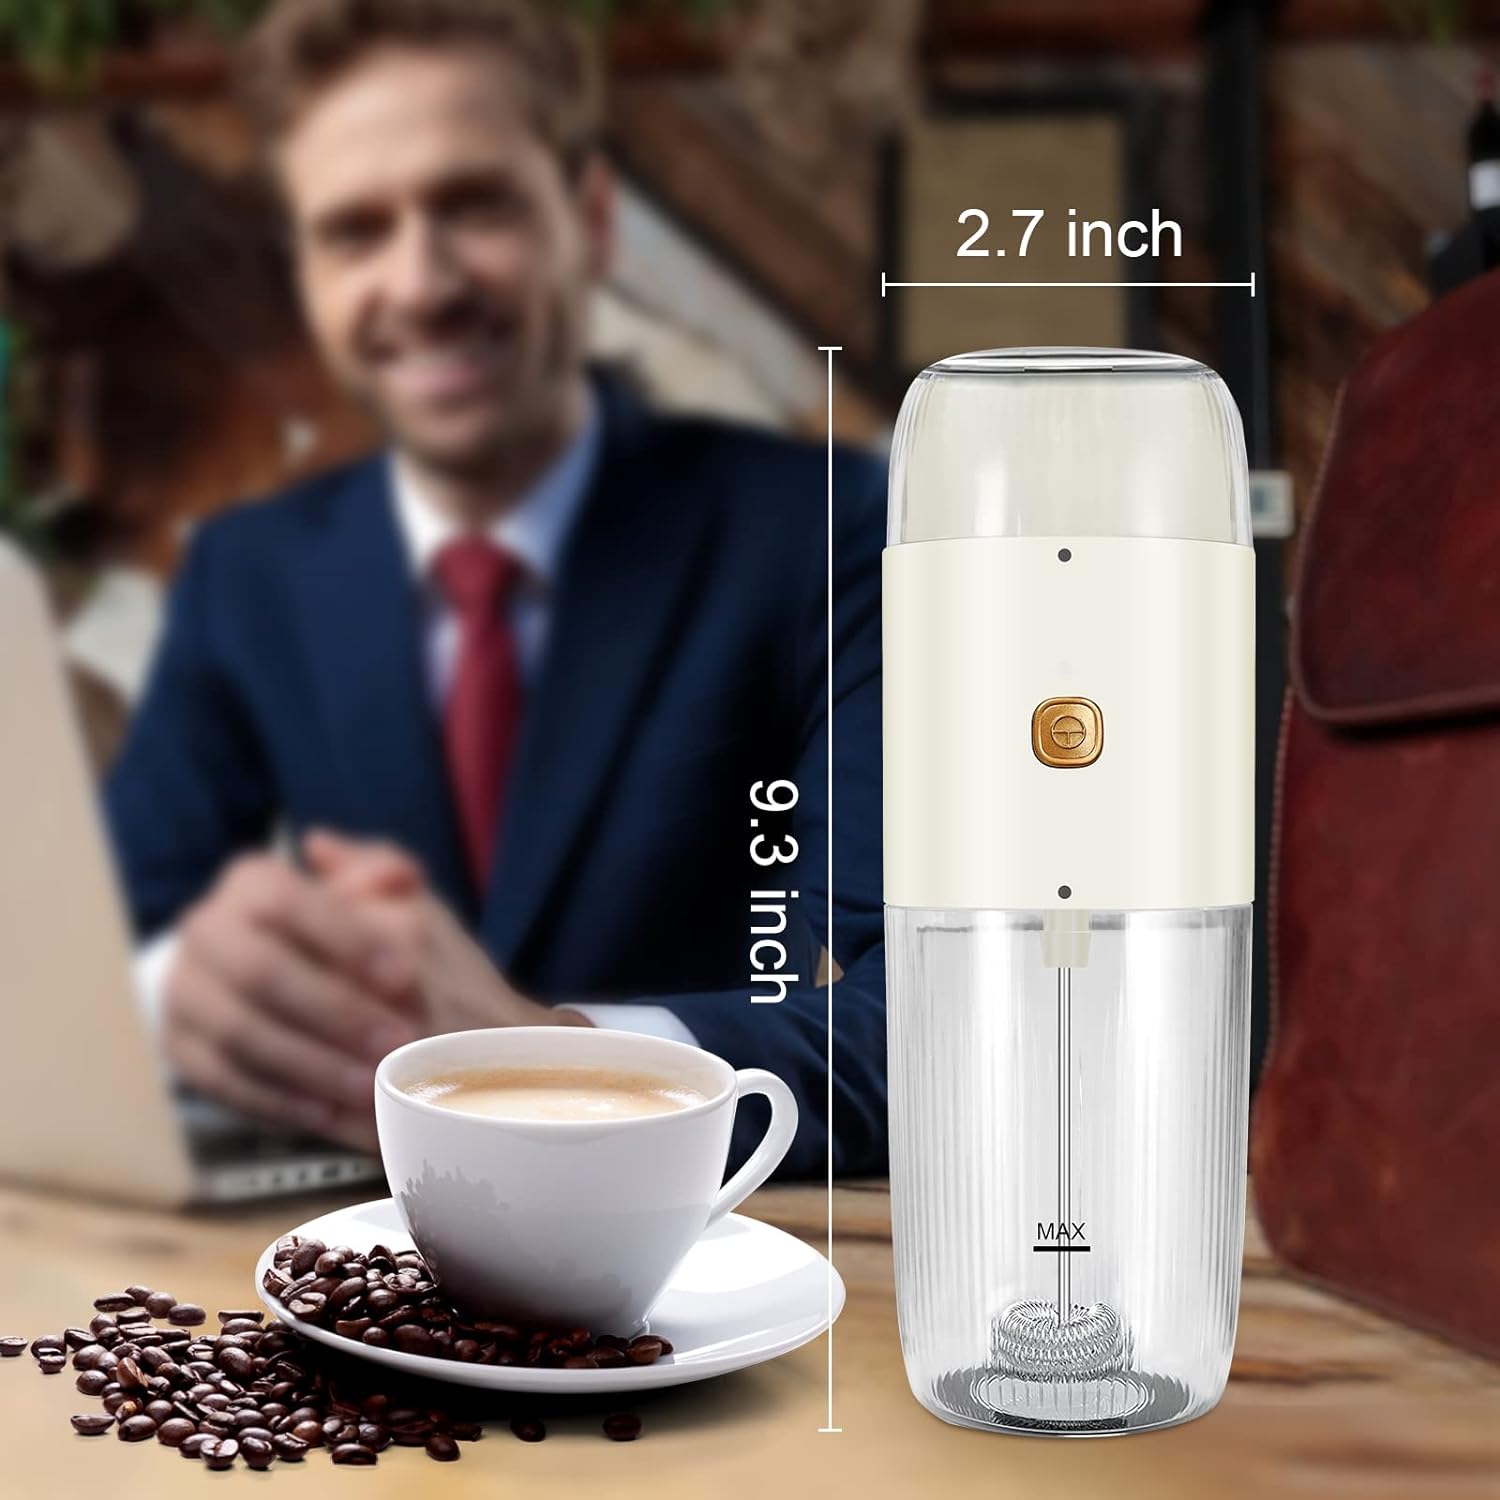 LePresso 2 in 1 Coffee Grinder & Milk Frothing 150ml - White